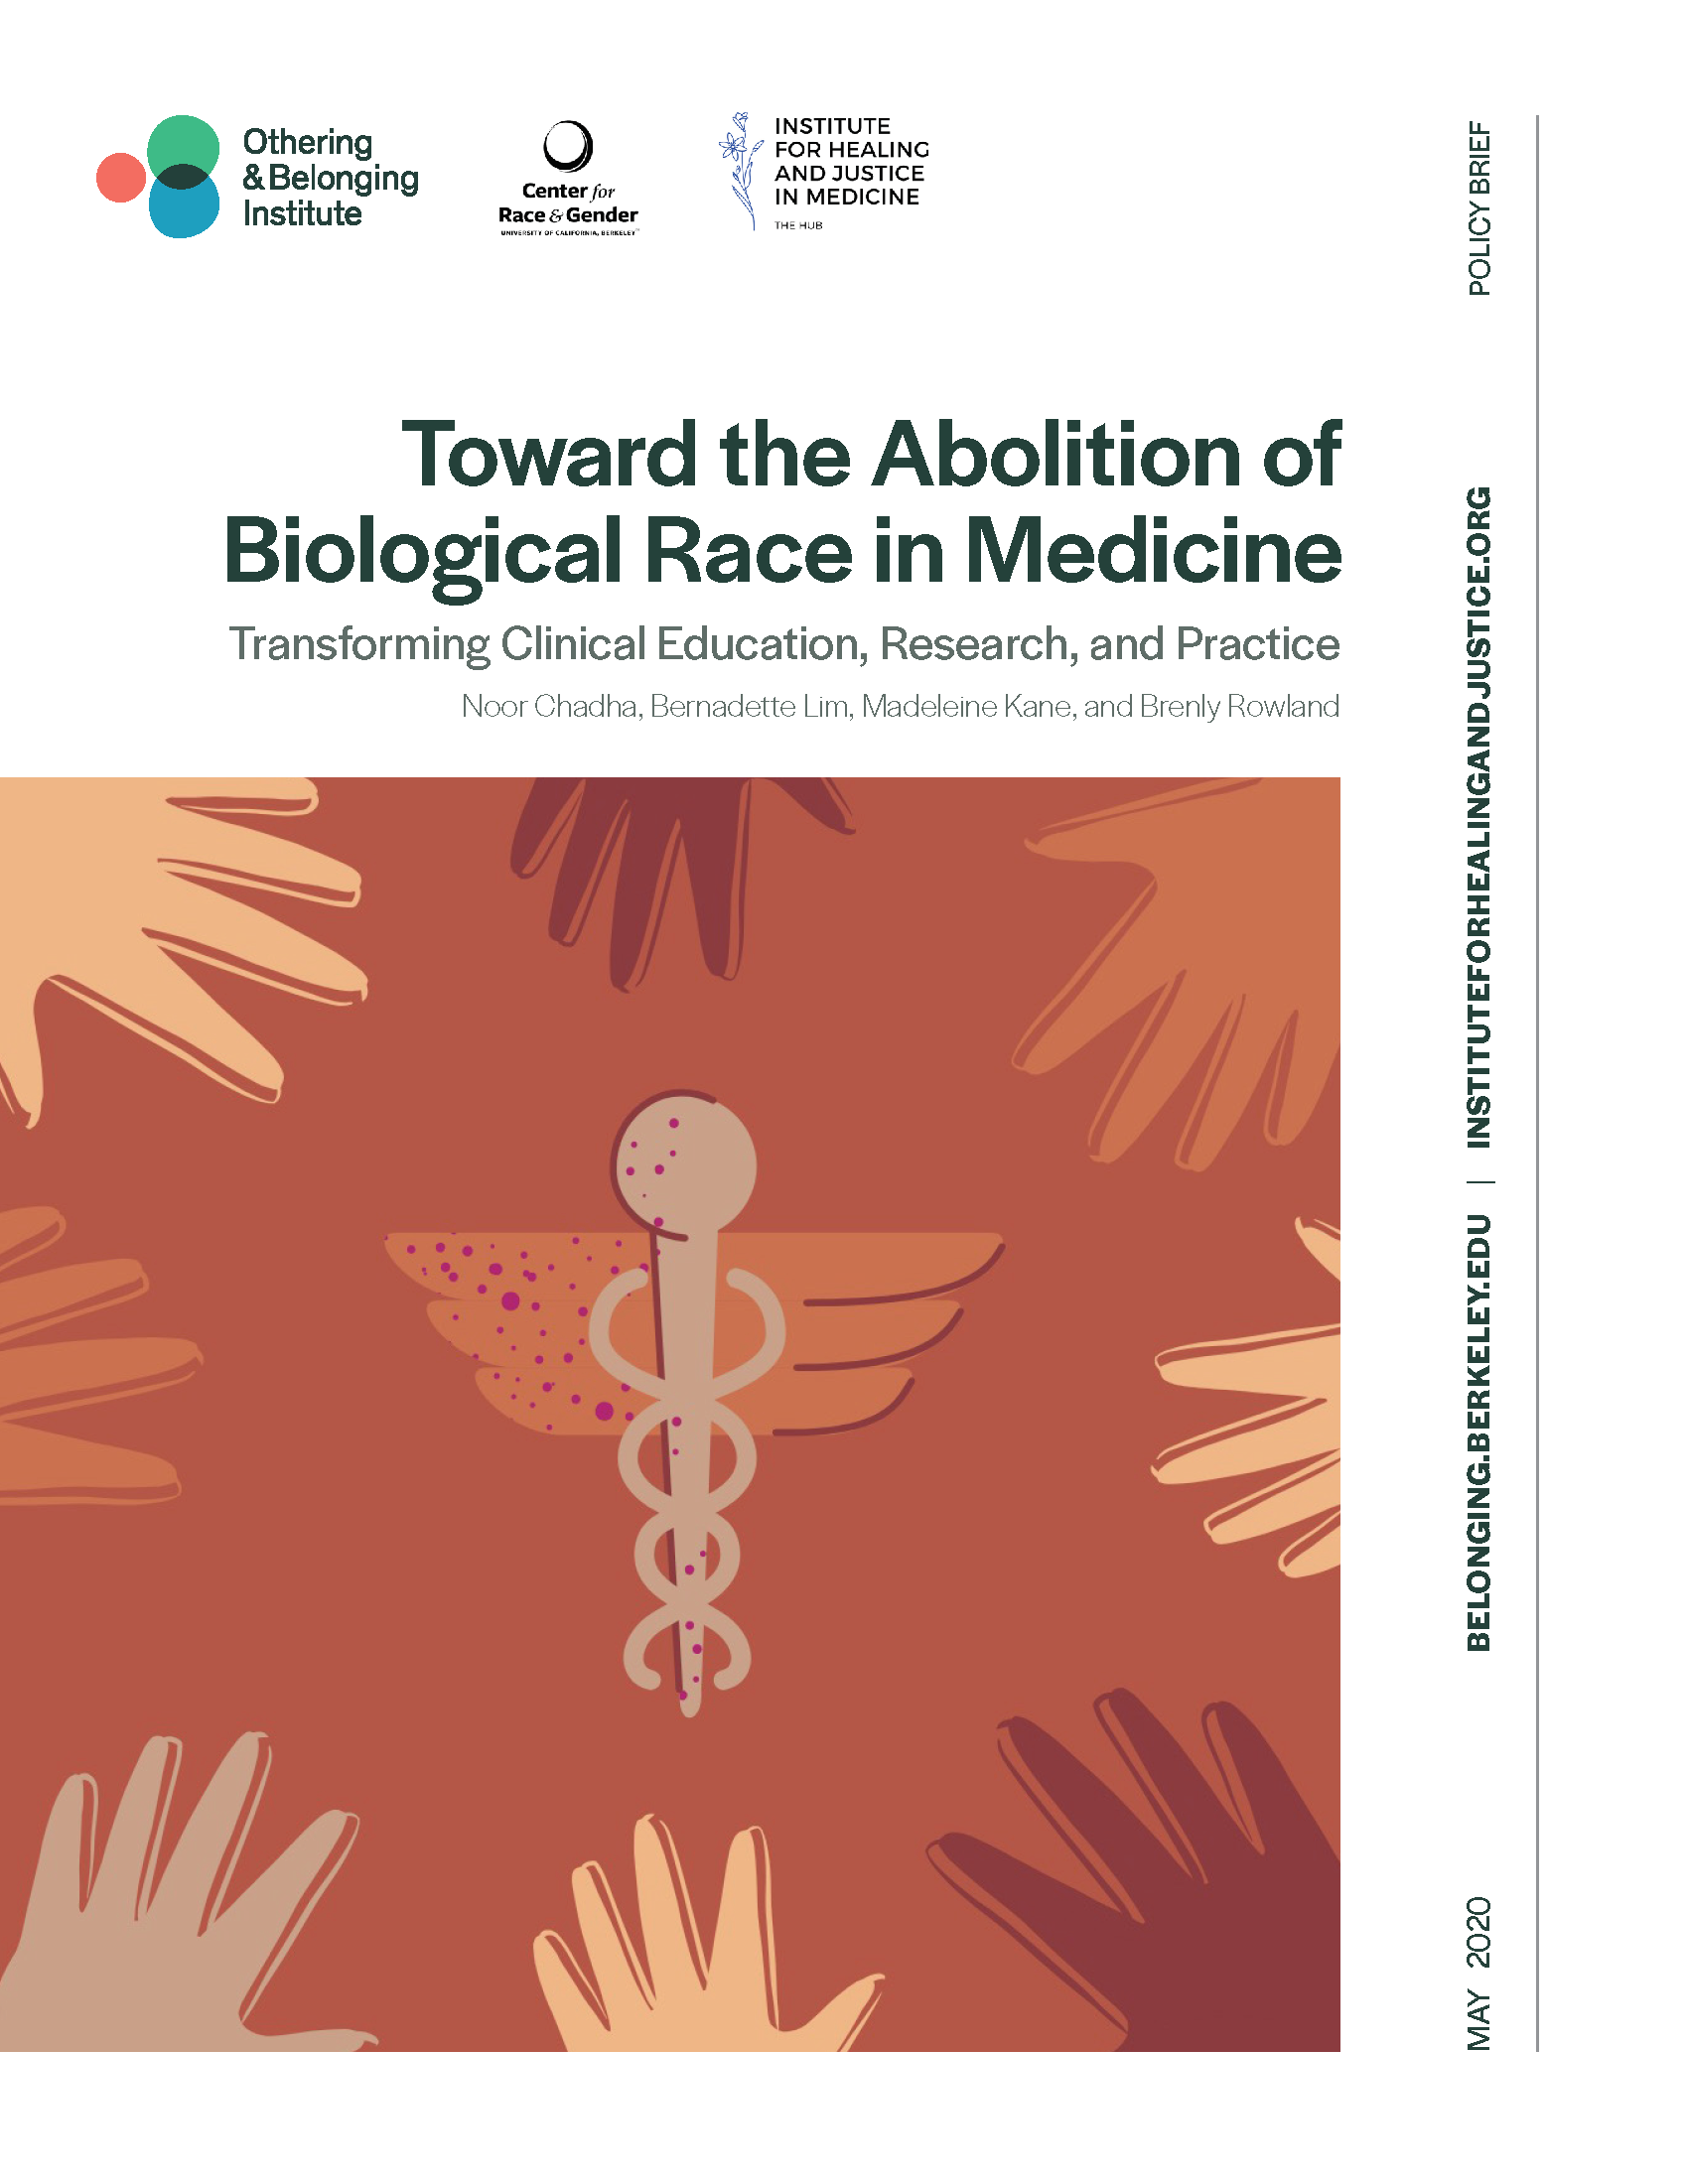 cover of the race in medicine report